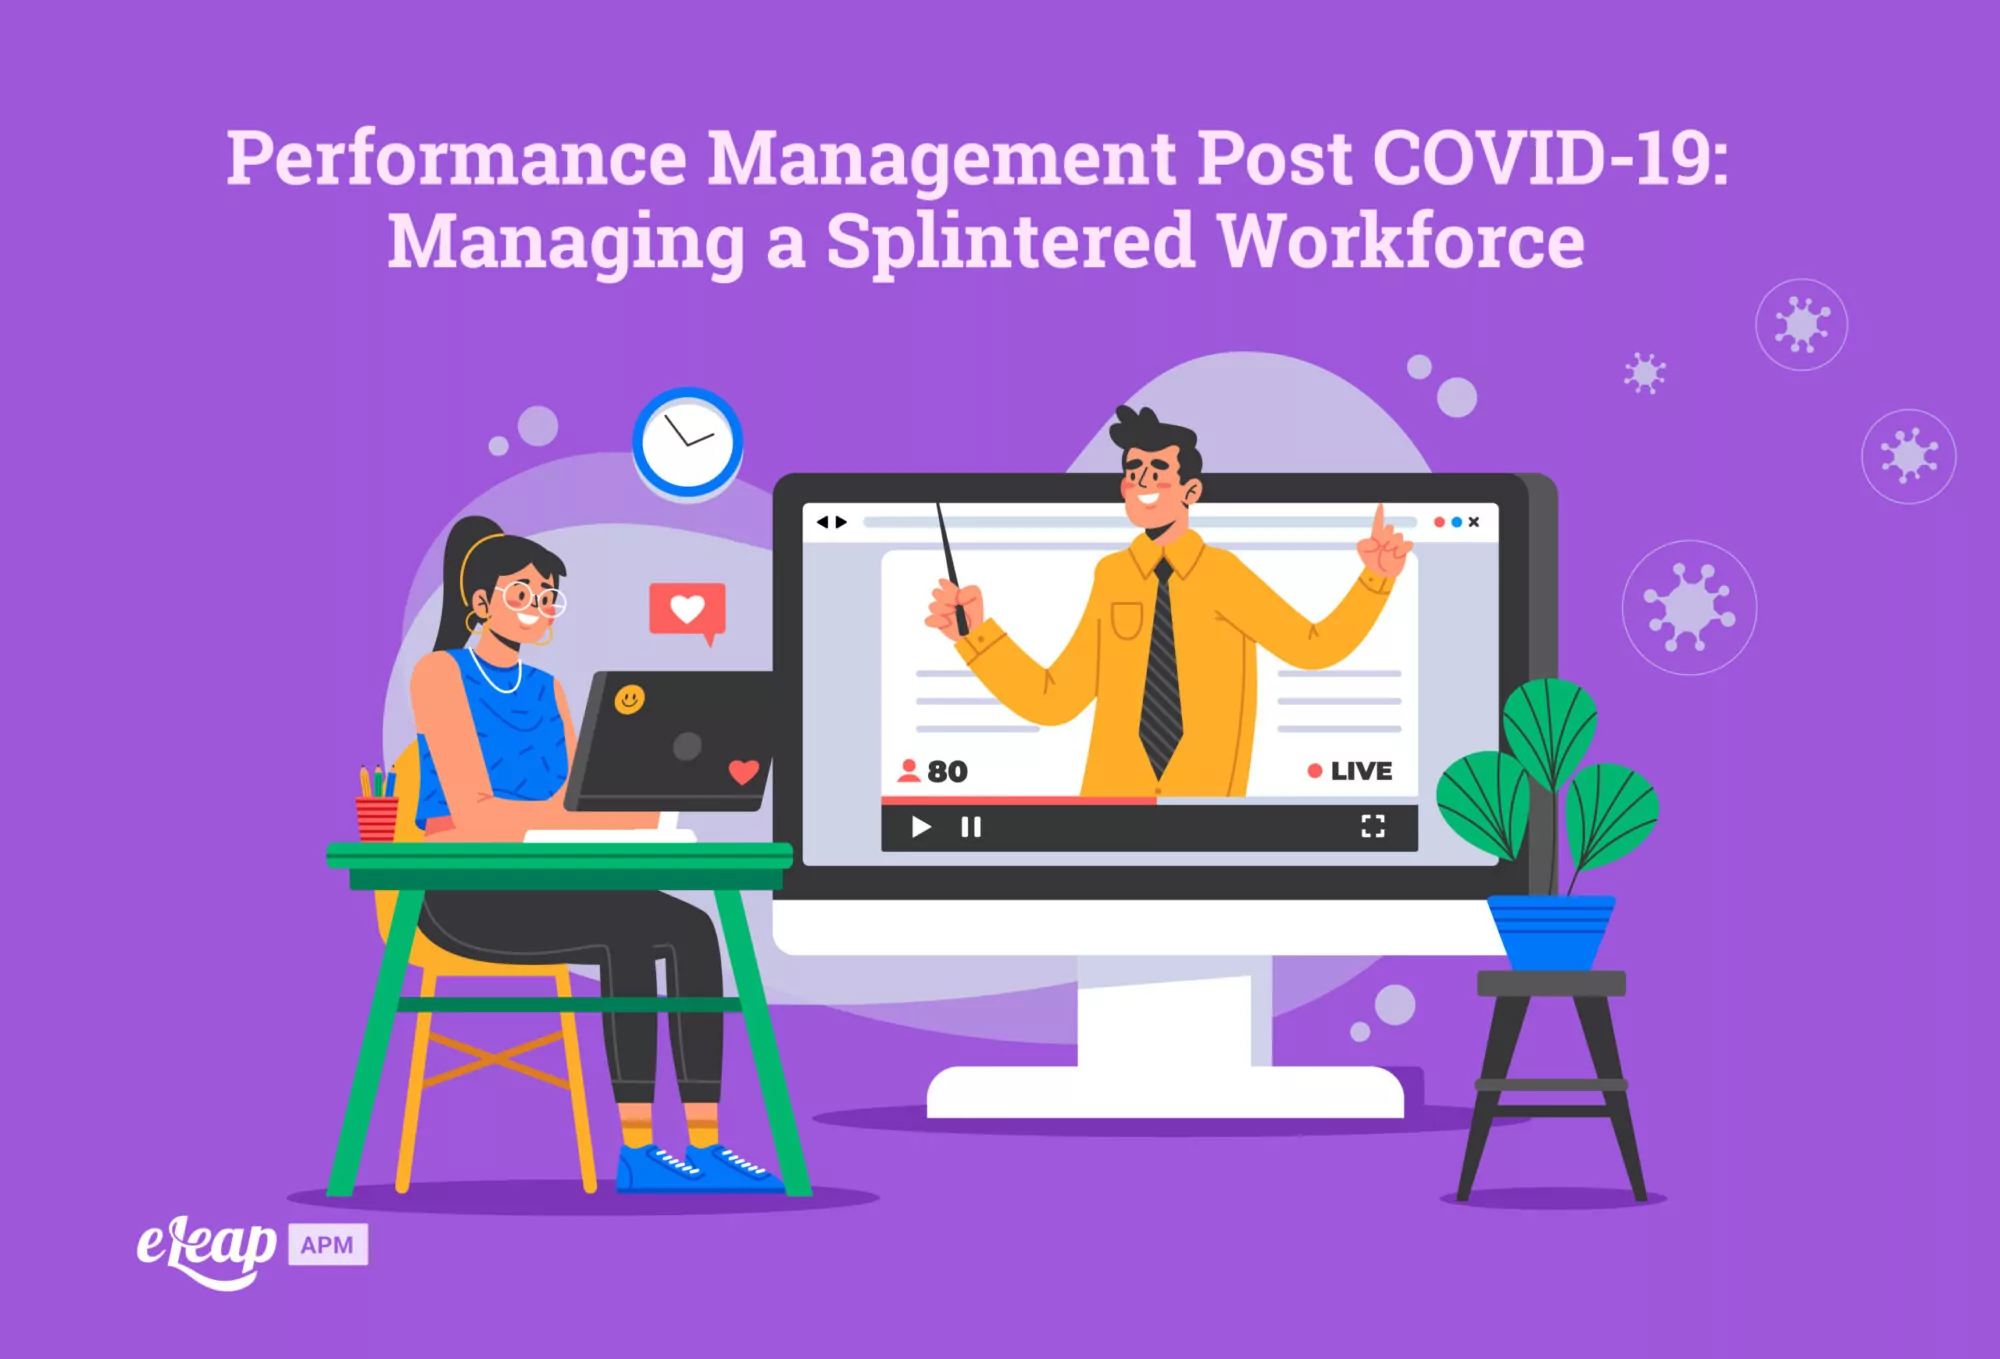 Performance Management Post COVID-19: Managing a Splintered Workforce and Dispersed Teams